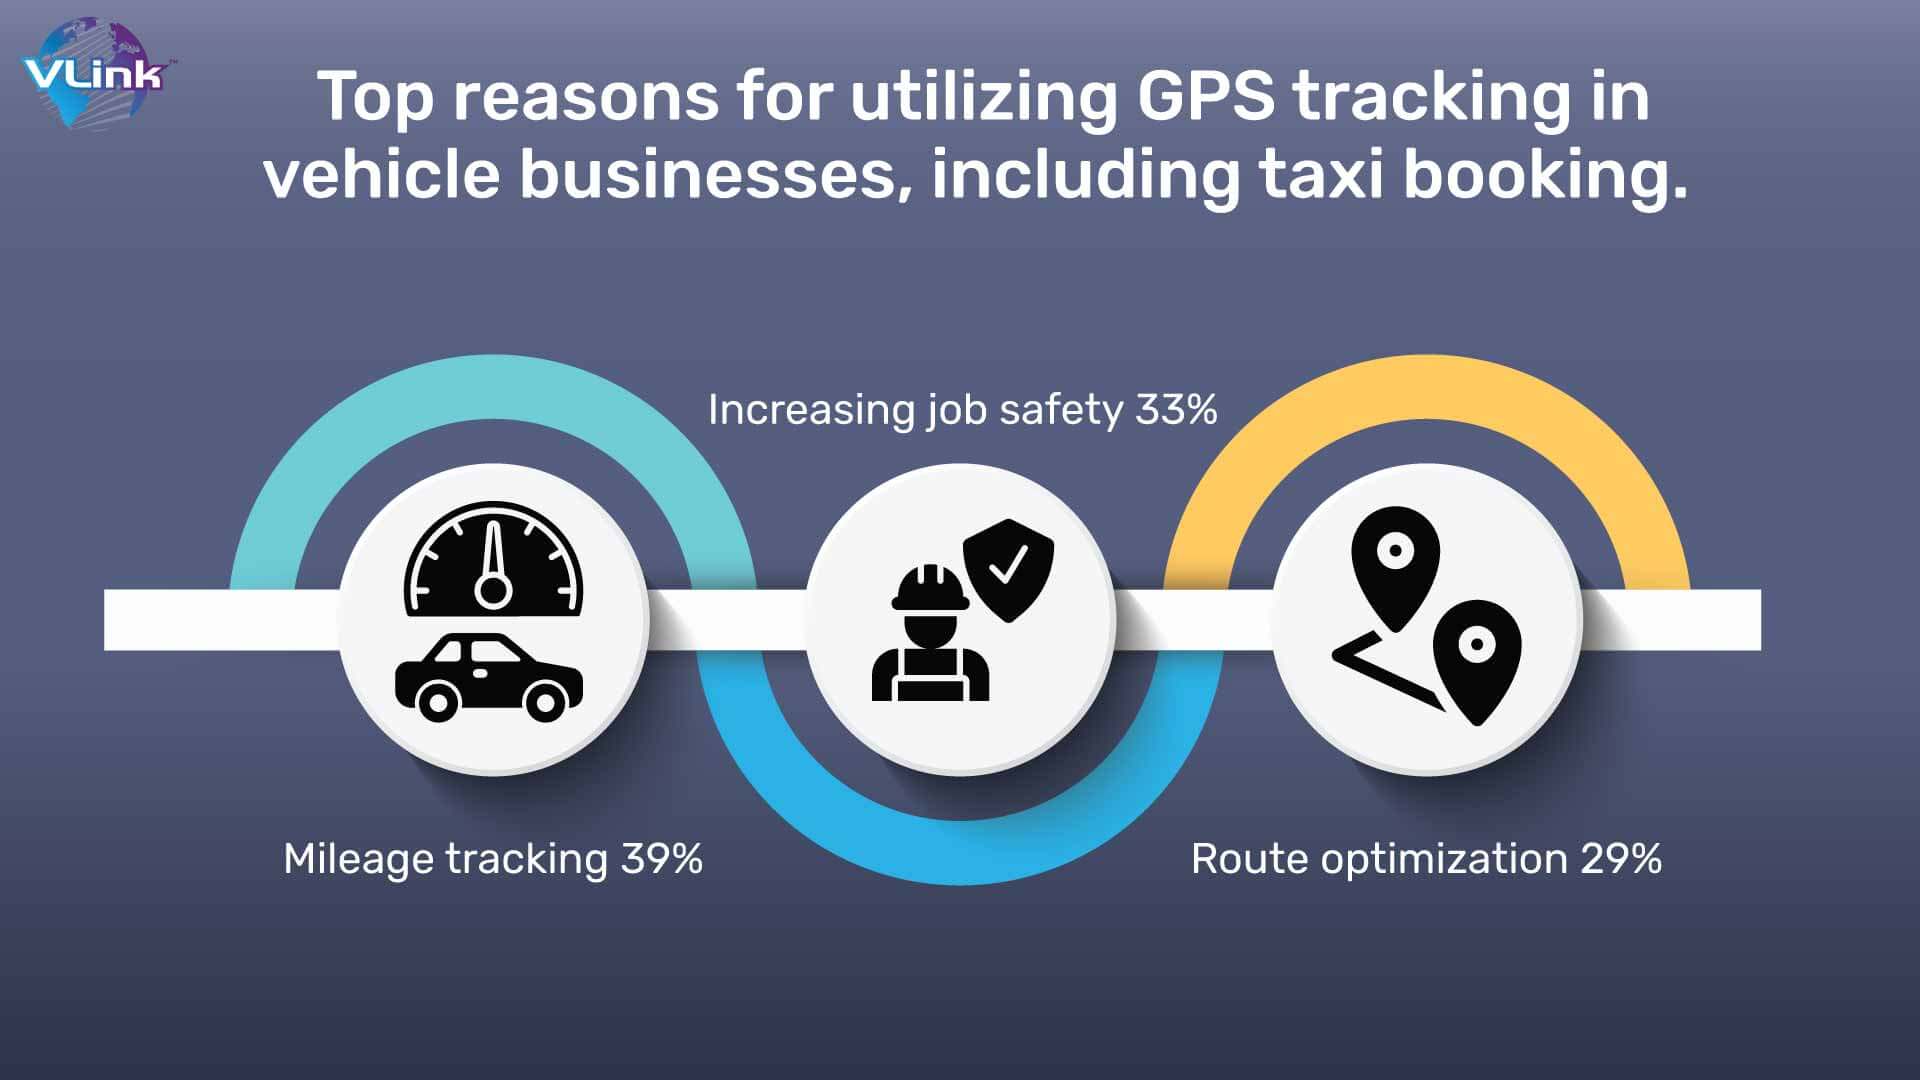 Top reasons for utilizing GPS tracking in vehicle businesses, including taxi booking